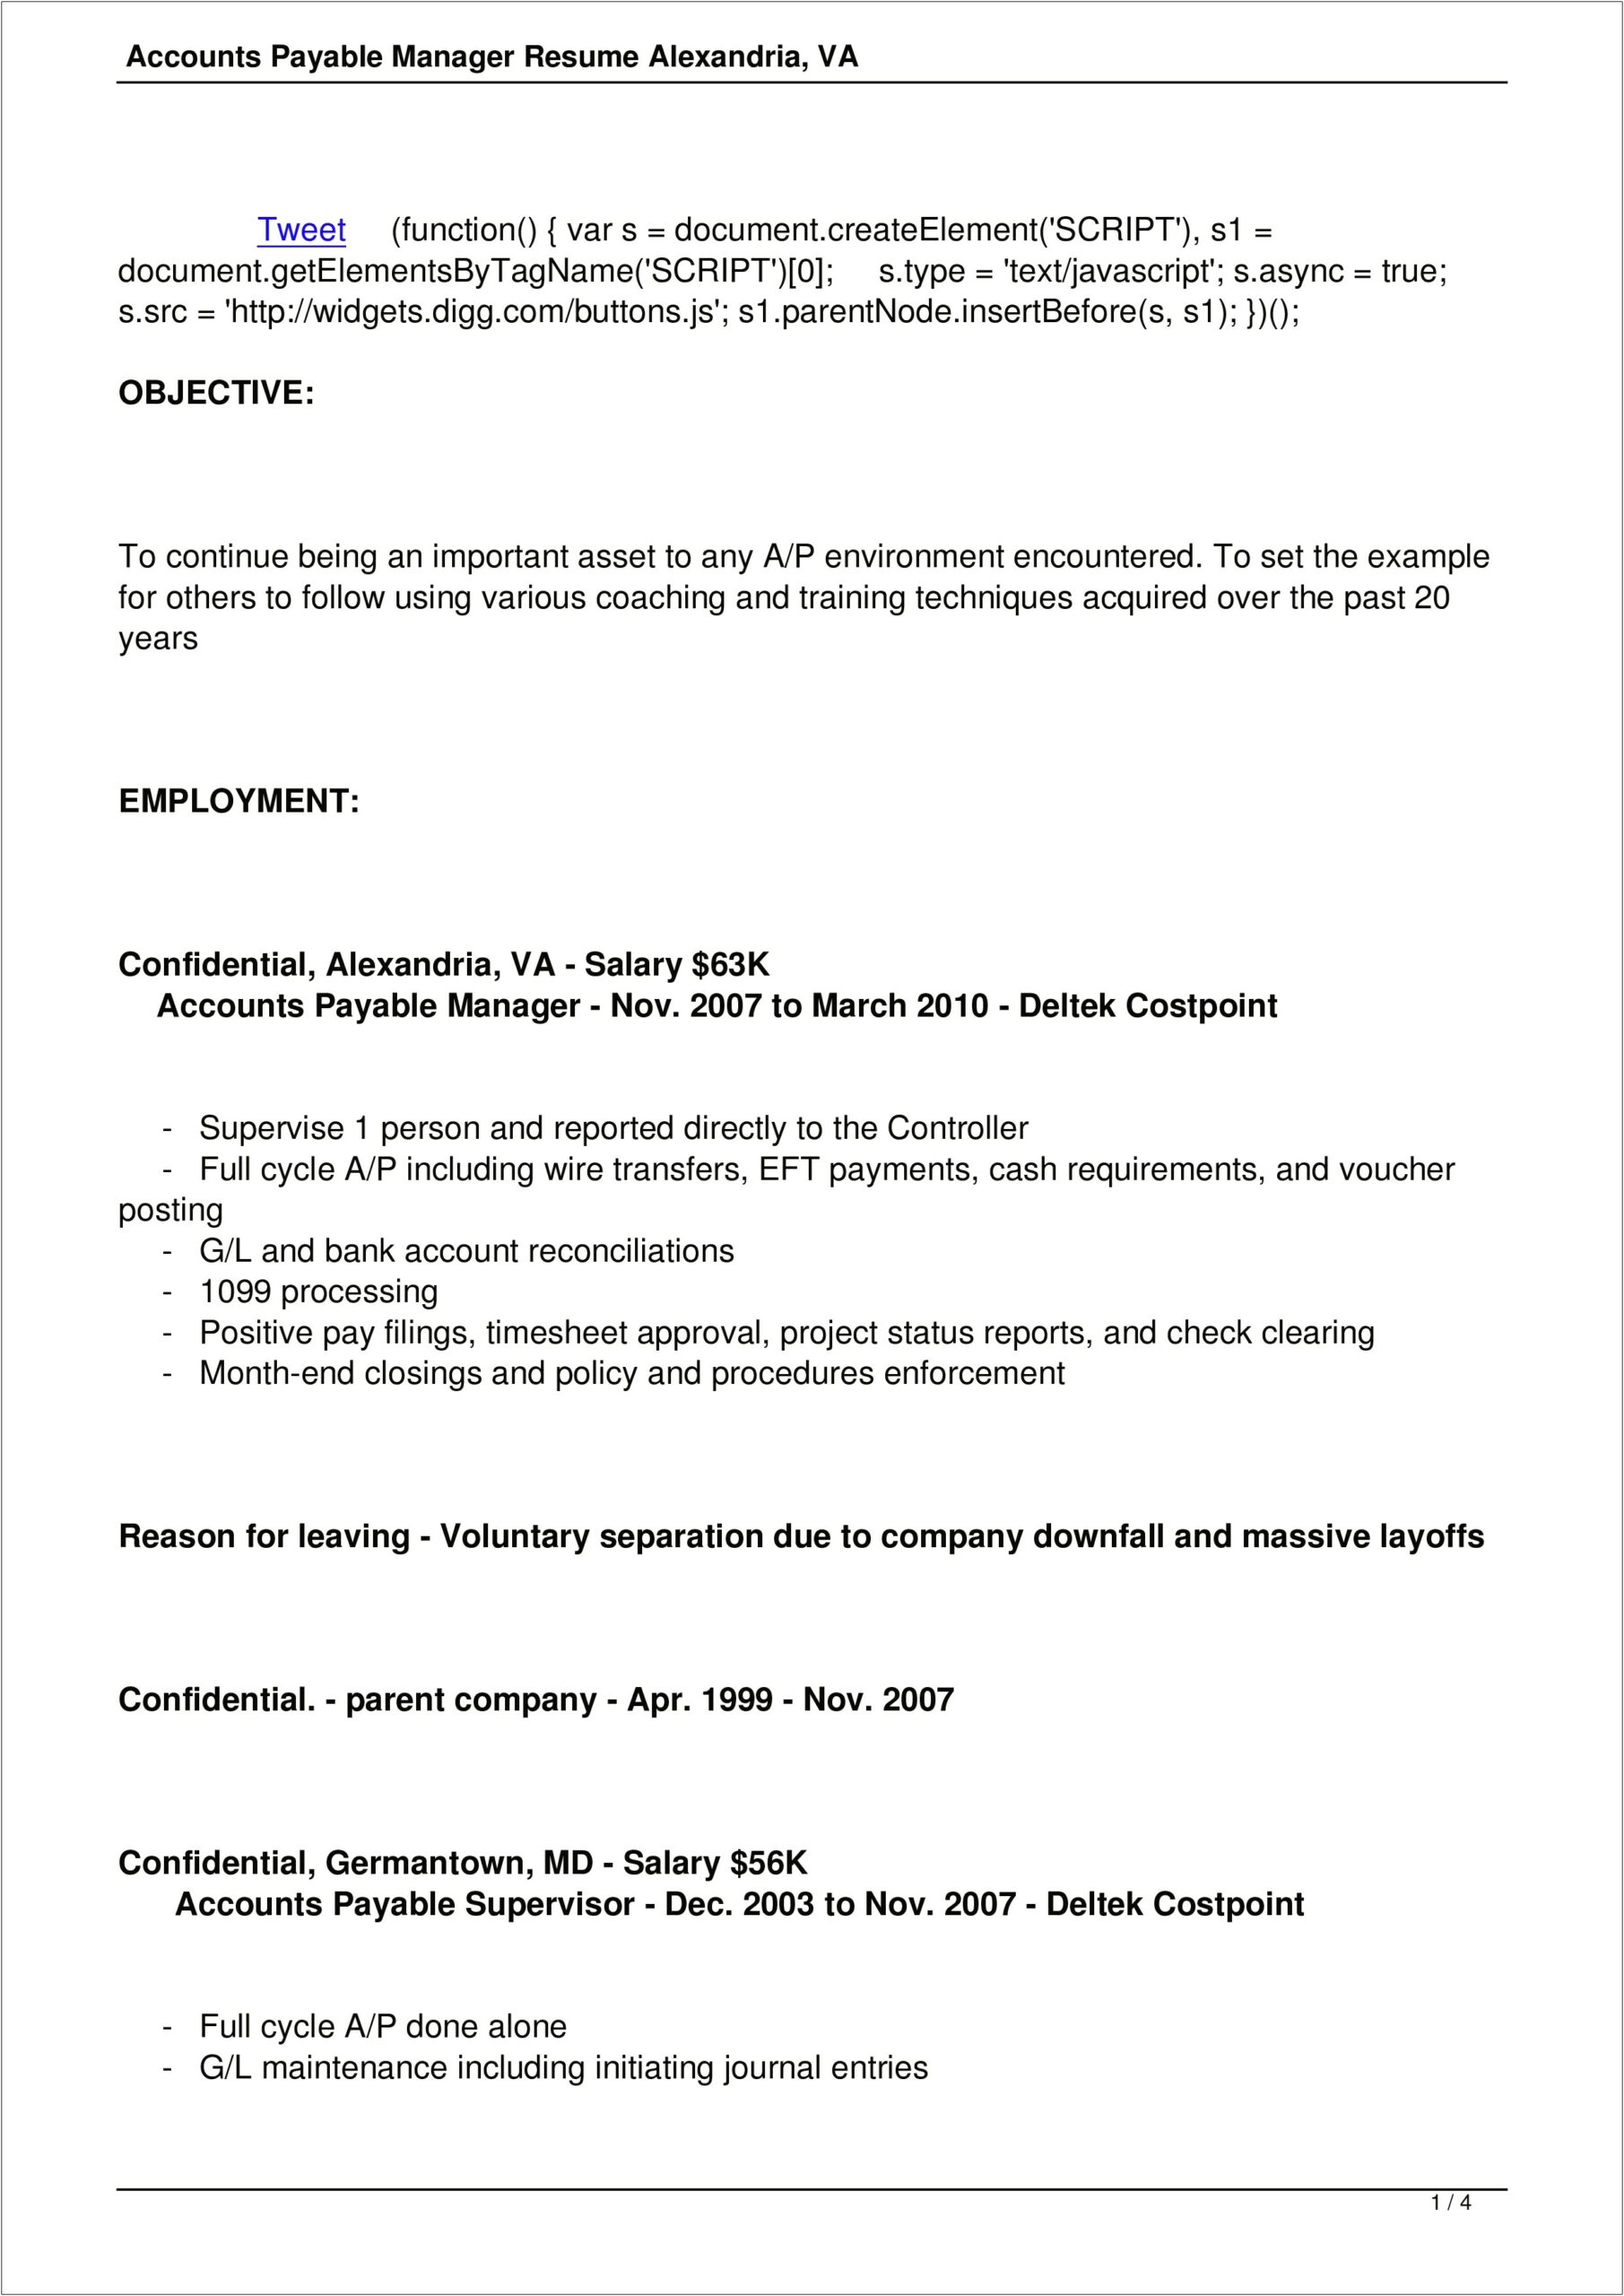 Peoplesoft Project Manager Resume Sample